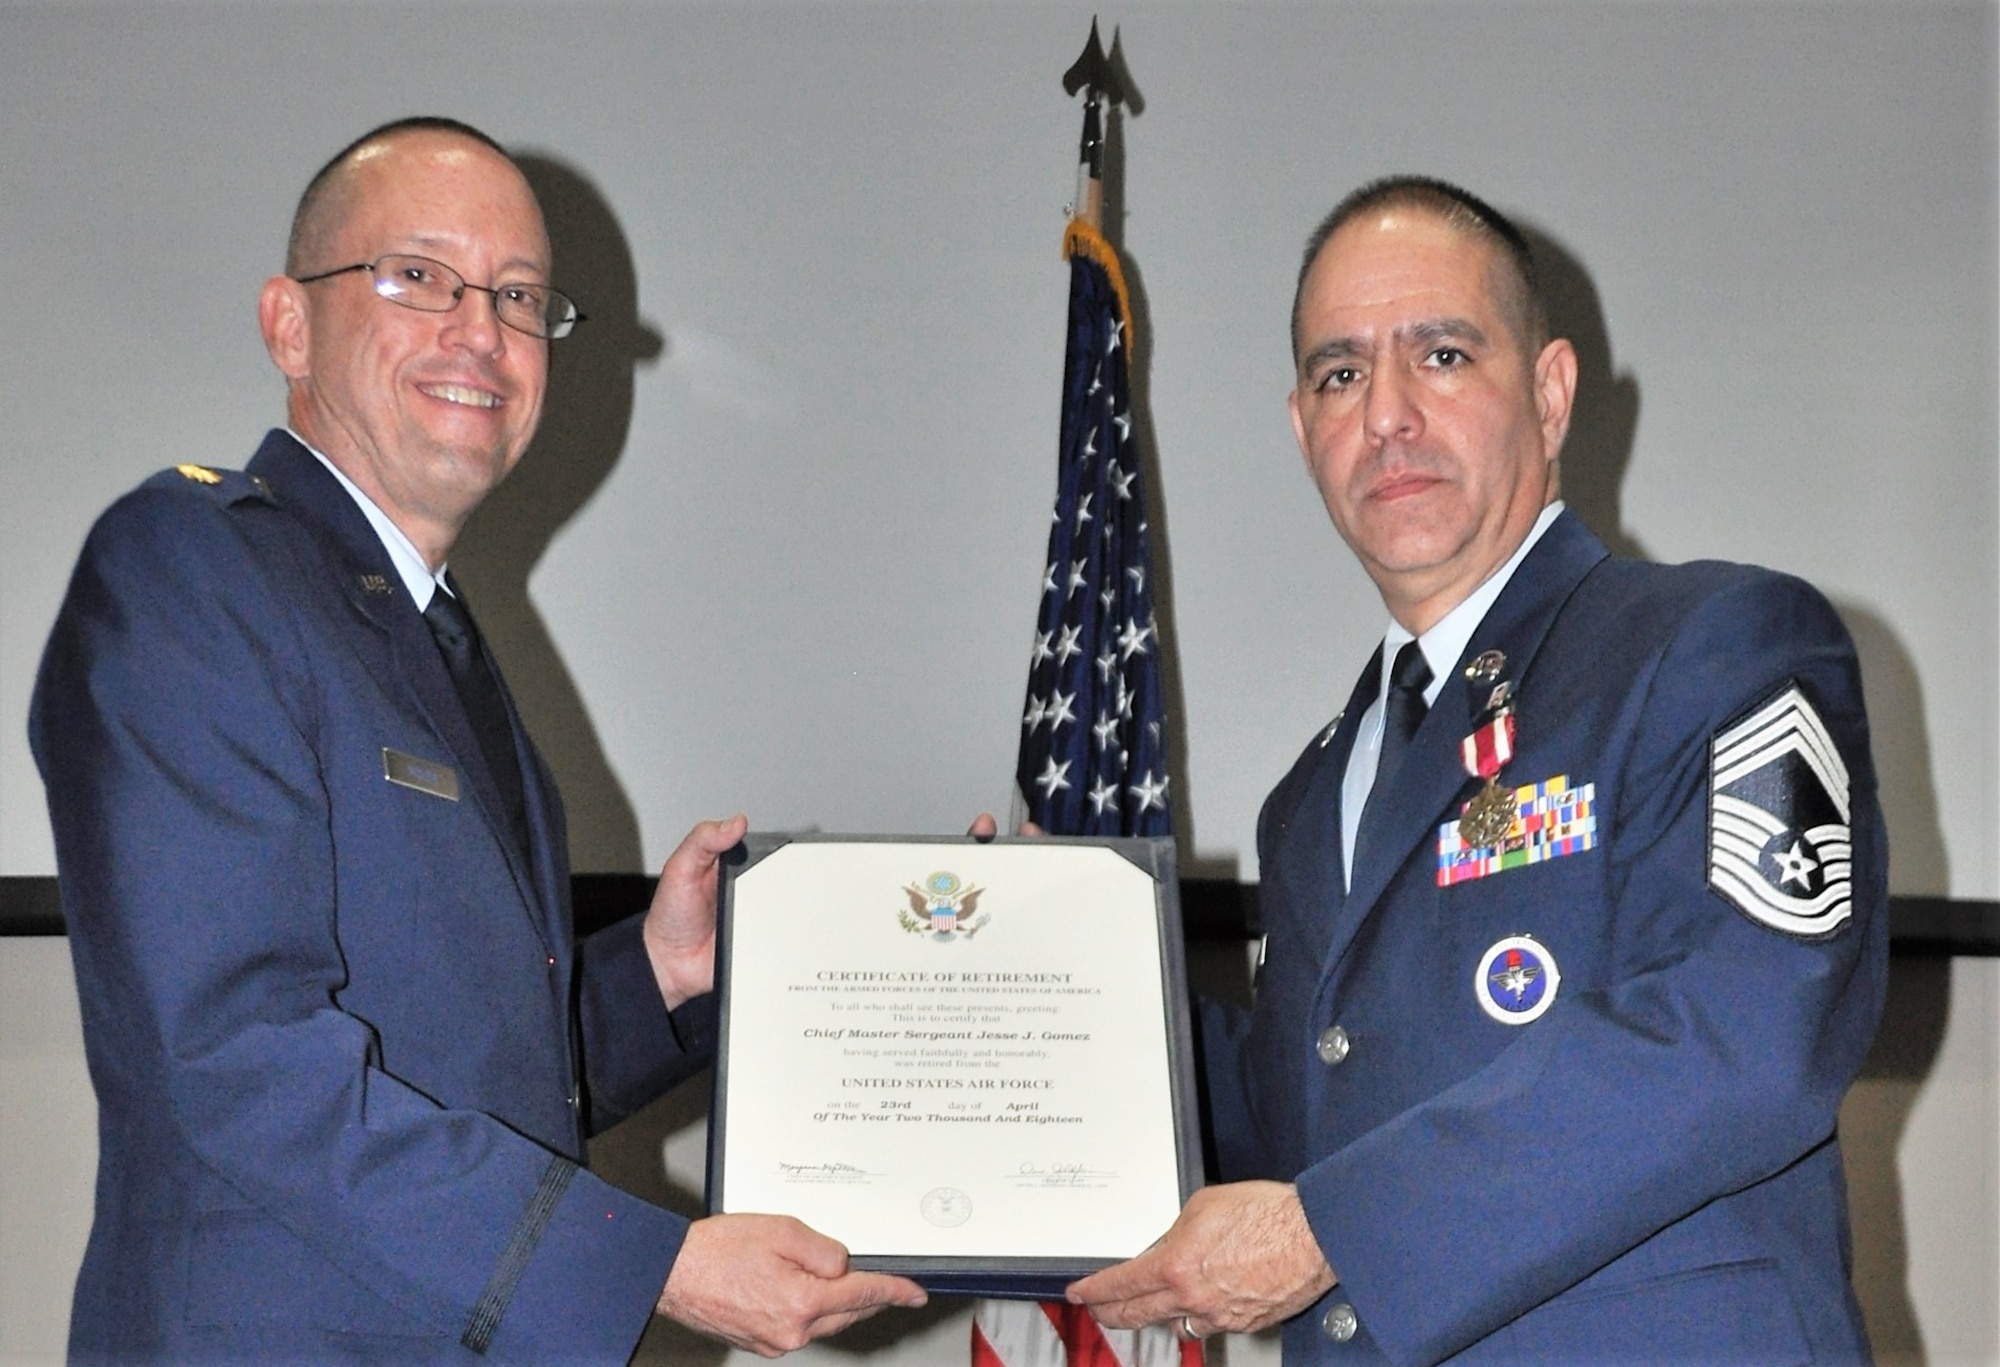 CMSgt Gomez retires from 433rd TRS